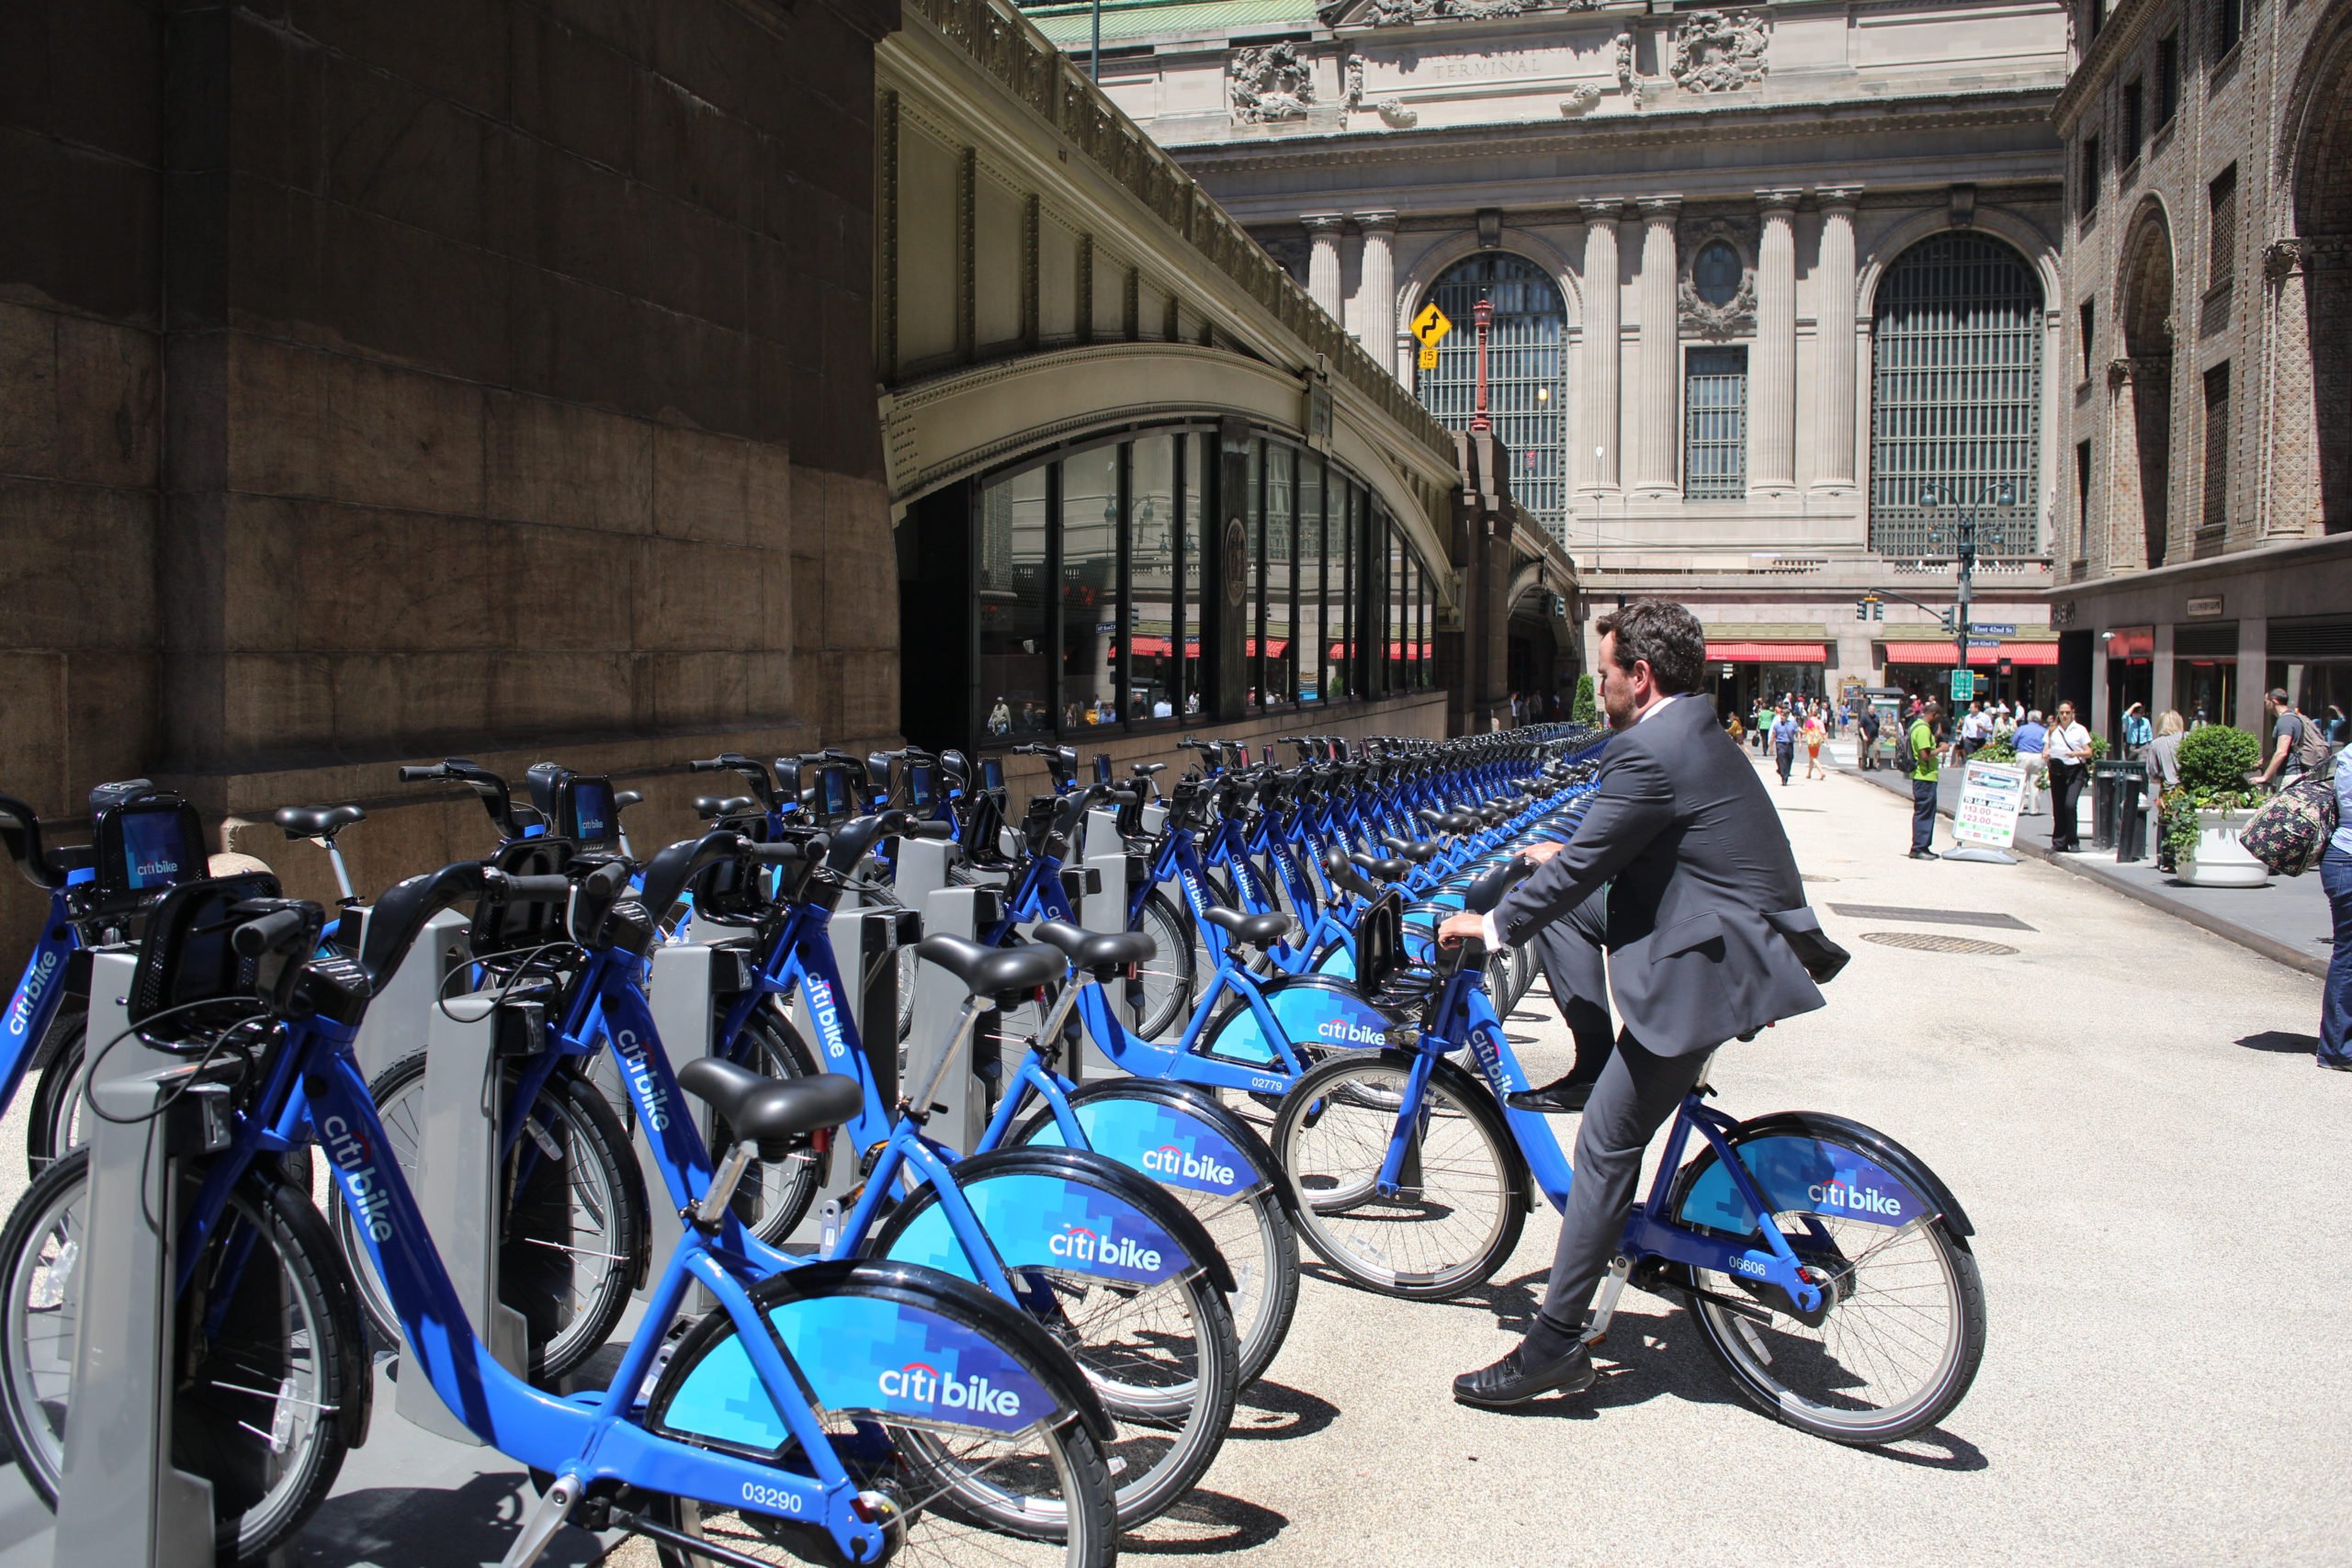 A Citi Bike docking station near Grand Central Terminal, Manhattan, New York. Citi Bike the NYC Bicycle Share Program sponsored by Citi Bank, launched in late May 2013 giving access to thousands of bikes at docking stations throughout Manhattan and parts of Brooklyn. Manhattan, New York, USA. Photo Tim Clayton (Photo by Tim Clayton/Corbis via Getty Images)